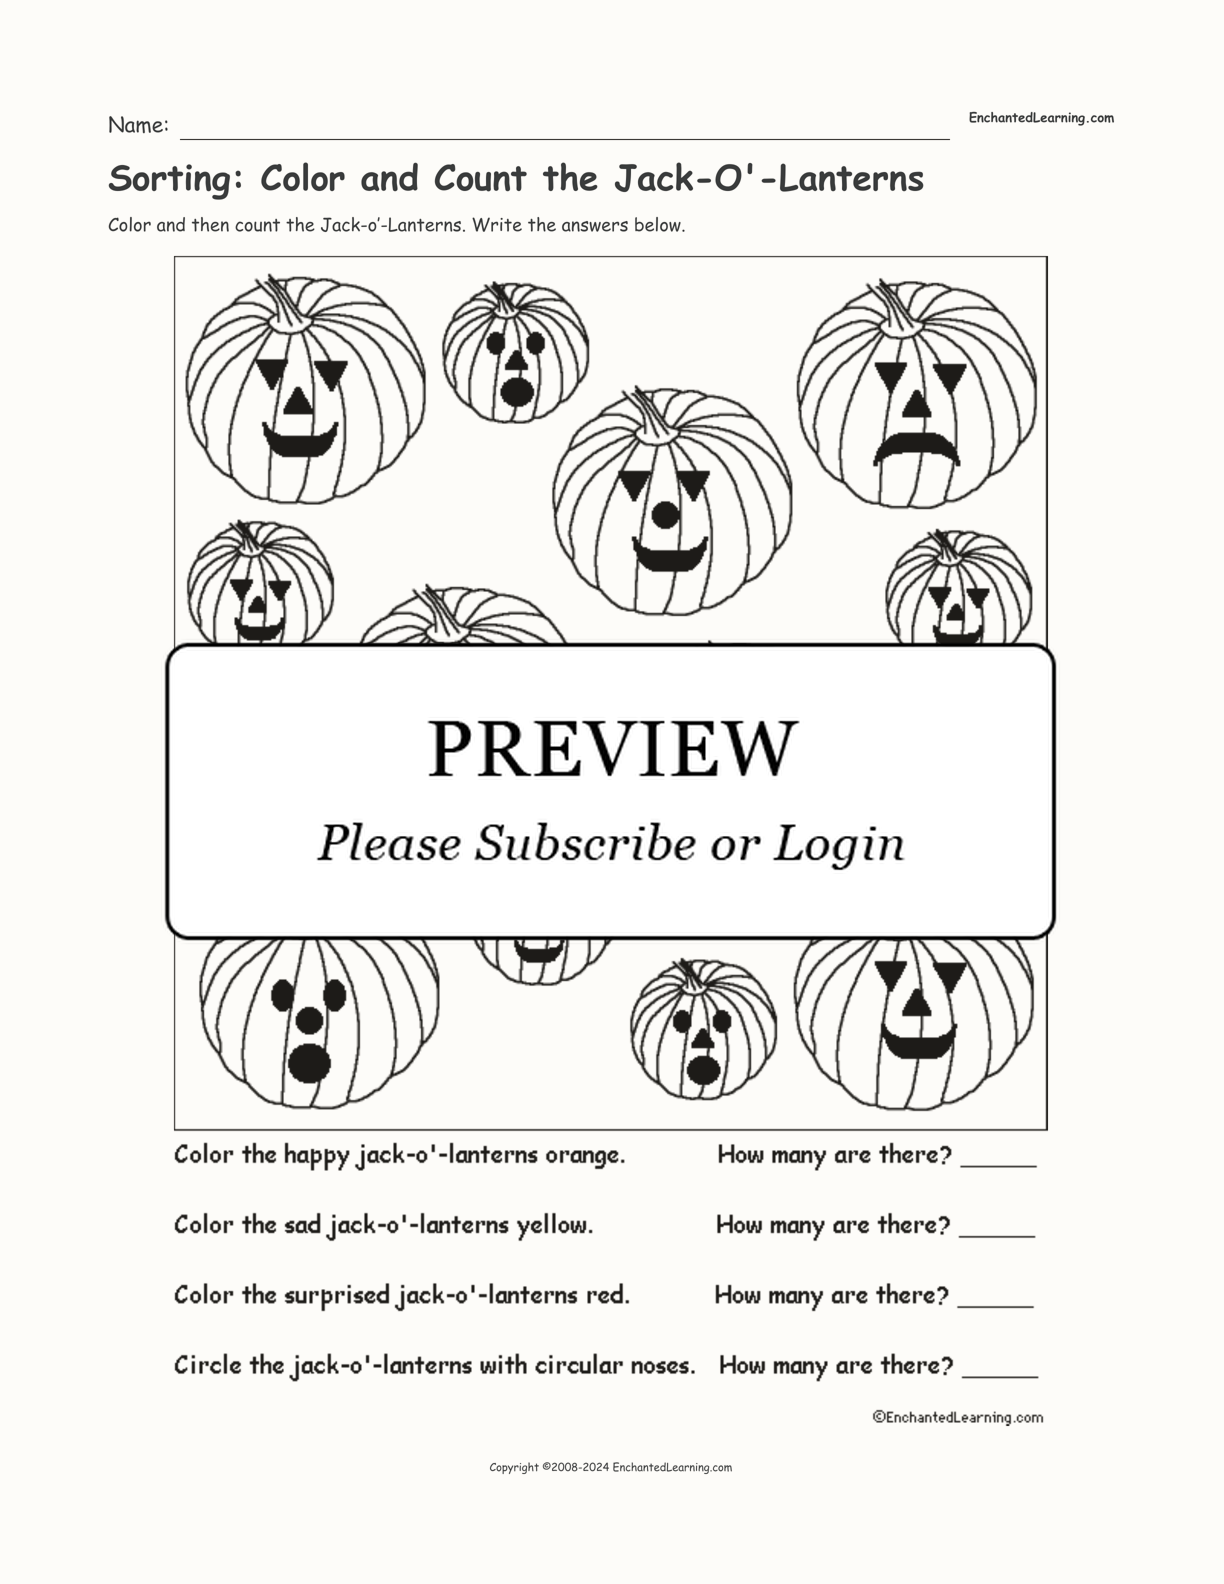 Sorting: Color and Count the Jack-O'-Lanterns interactive worksheet page 1